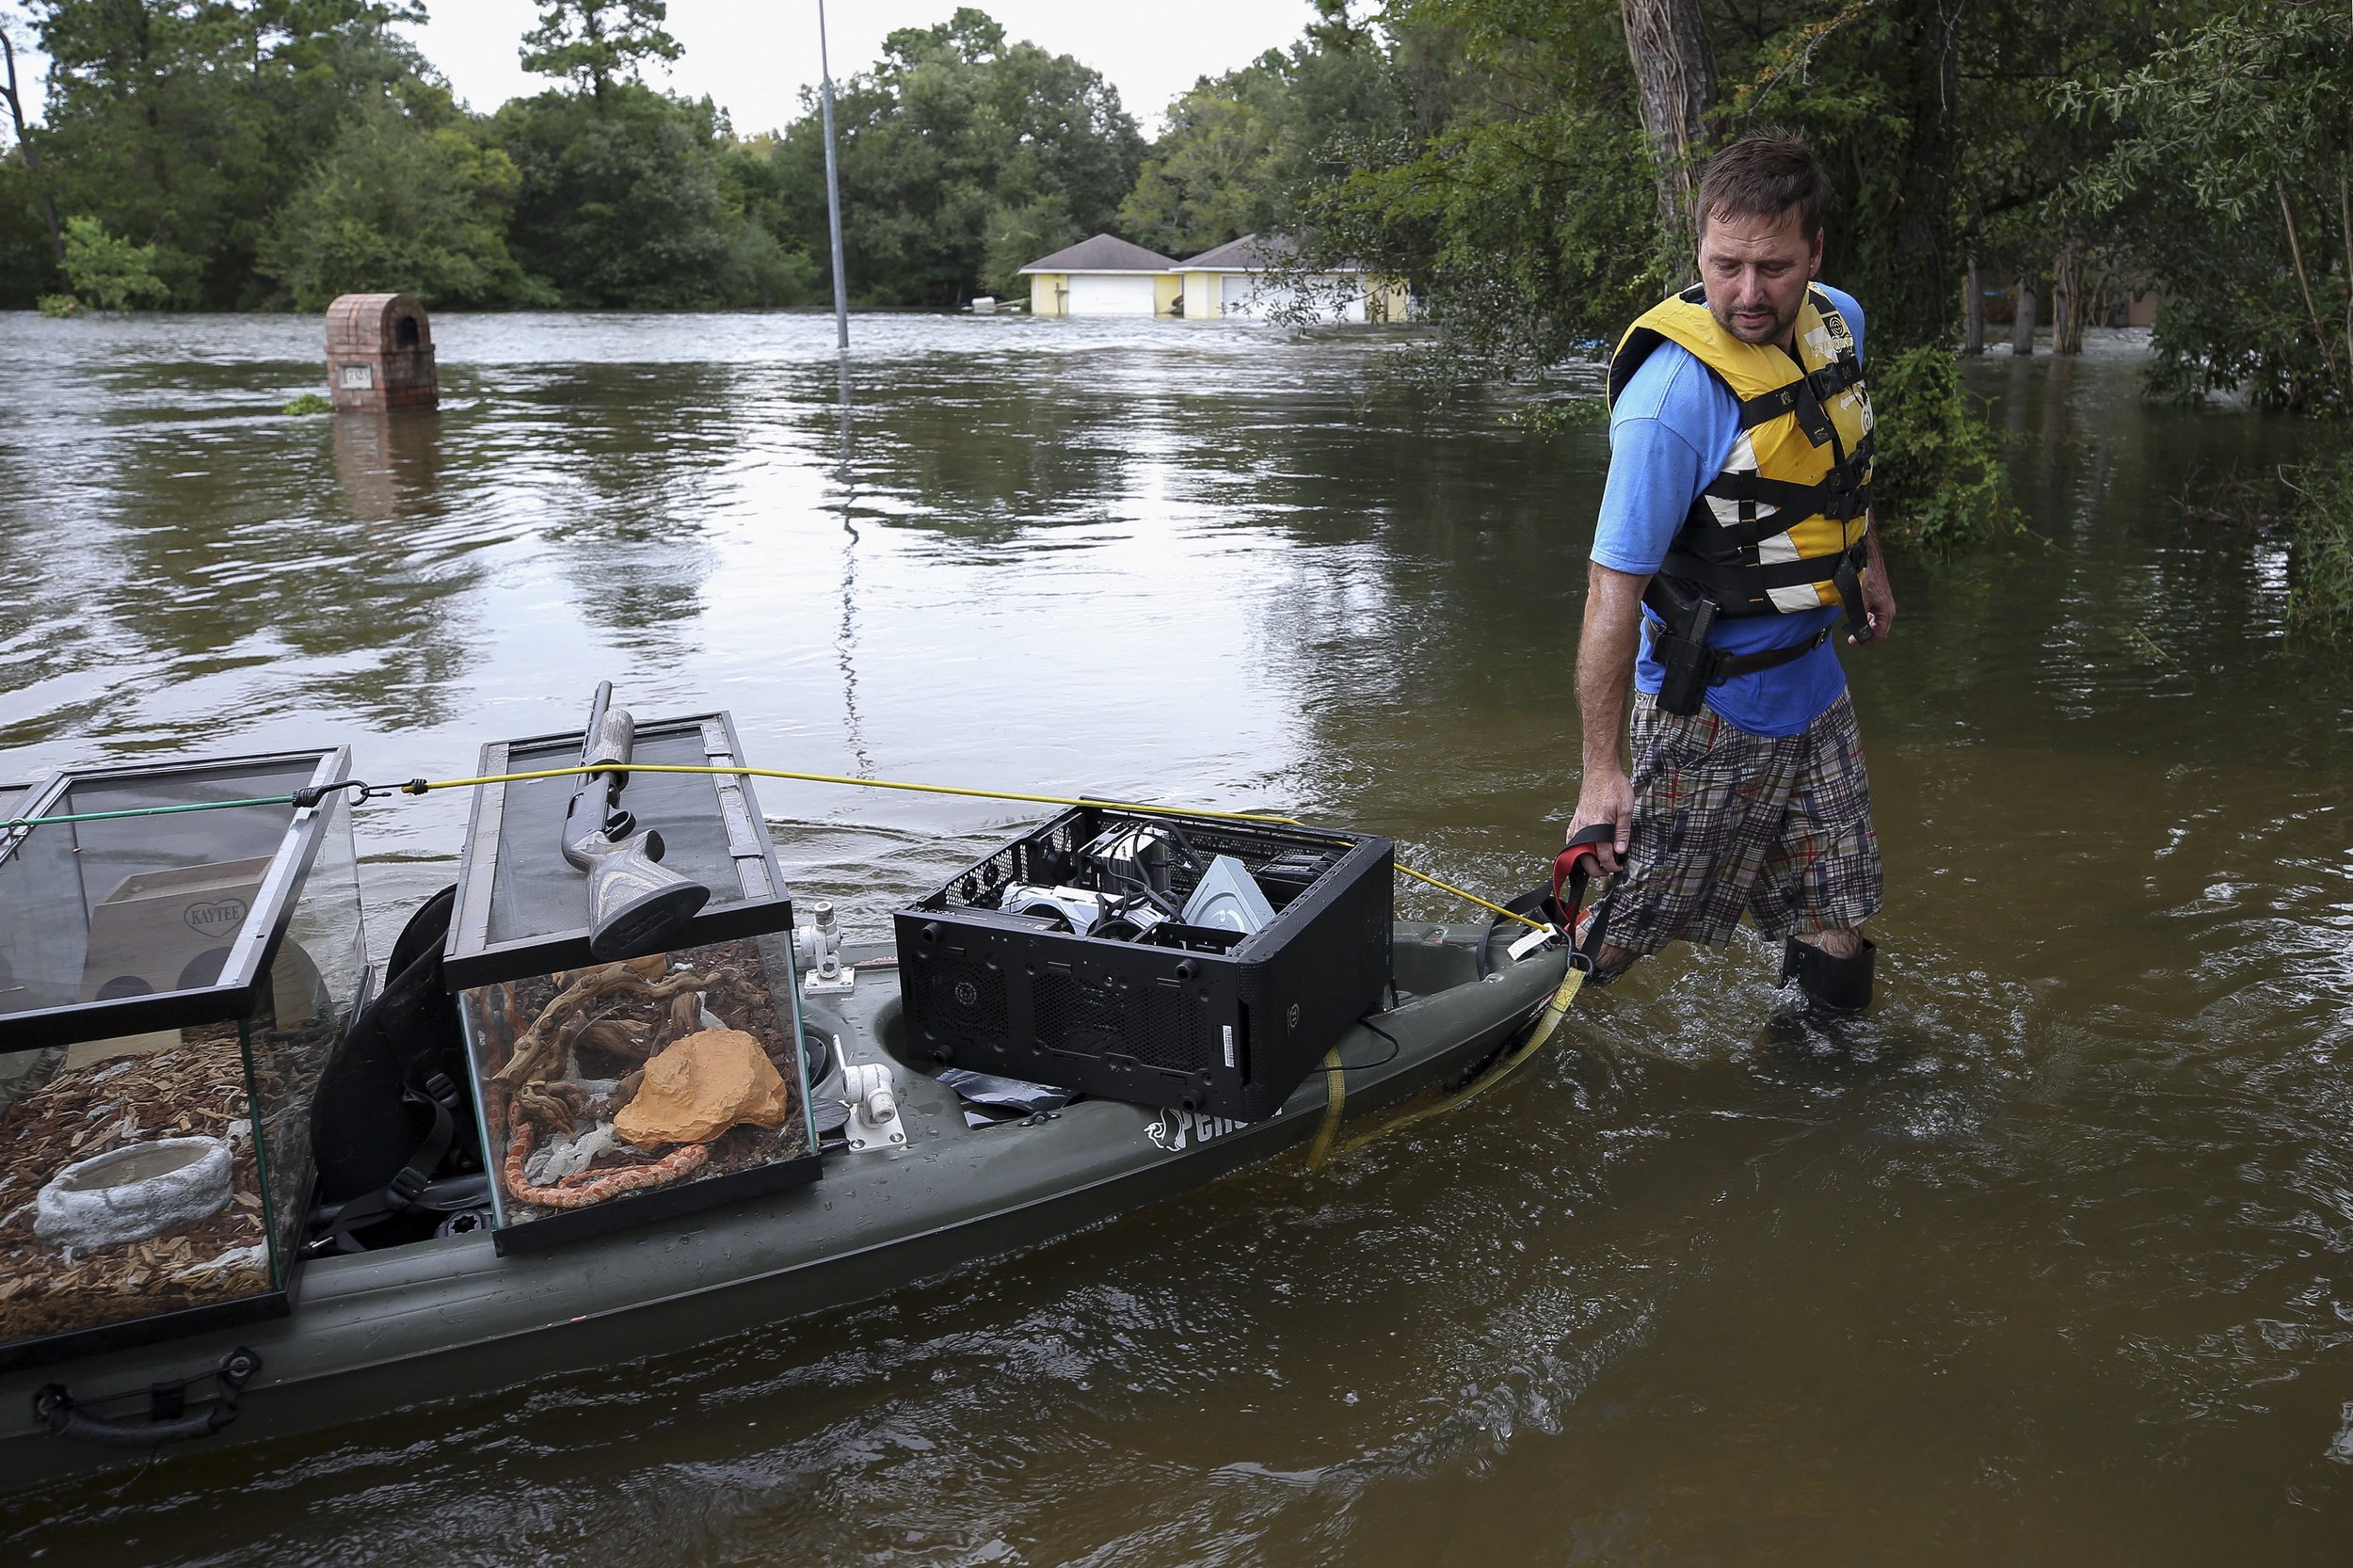  Alen Pogue drags a kayak carrying three pet snakes, a leopard gecko, and firearms after returning from his flooded home during Hurricane Harvey on Wednesday, Aug. 30, 2017, in Baytown, Texas. 